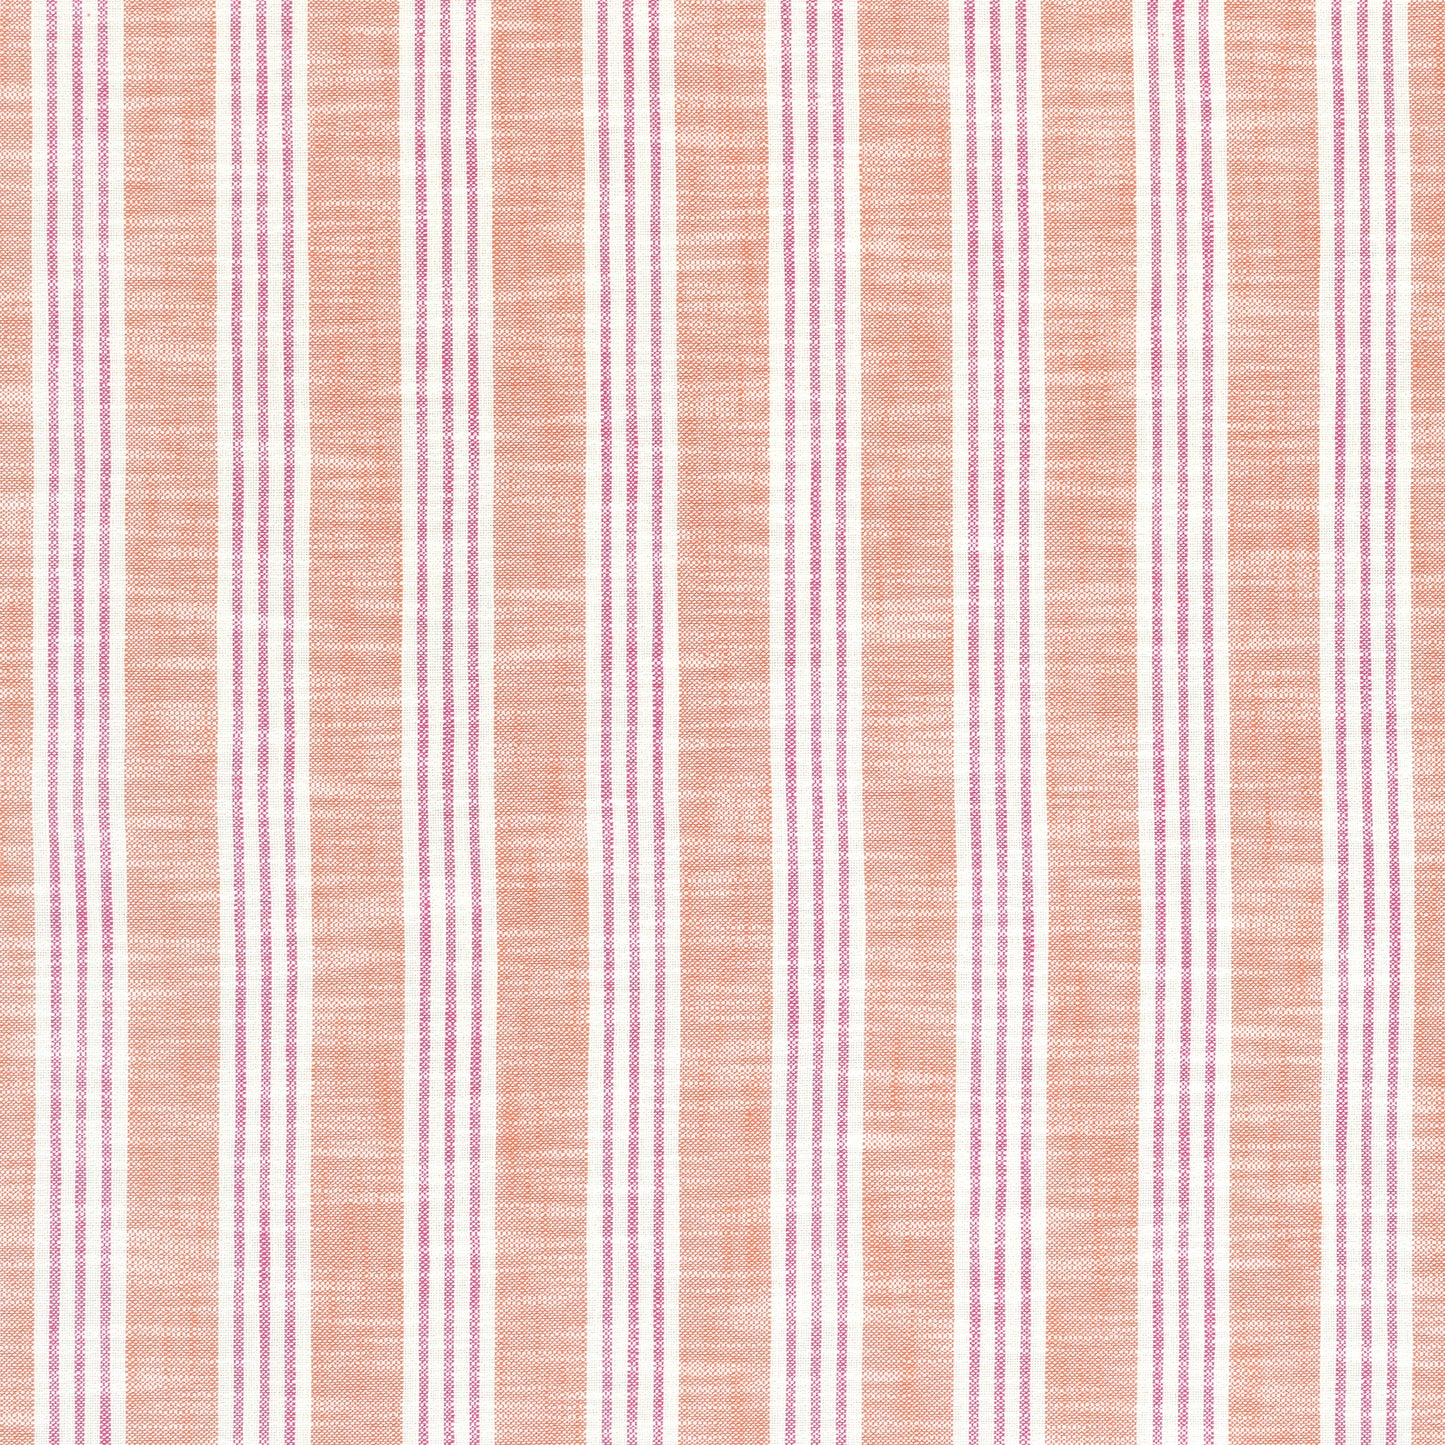 Purchase Thibaut Fabric SKU W73491 pattern name Southport Stripe color Coral and Peony